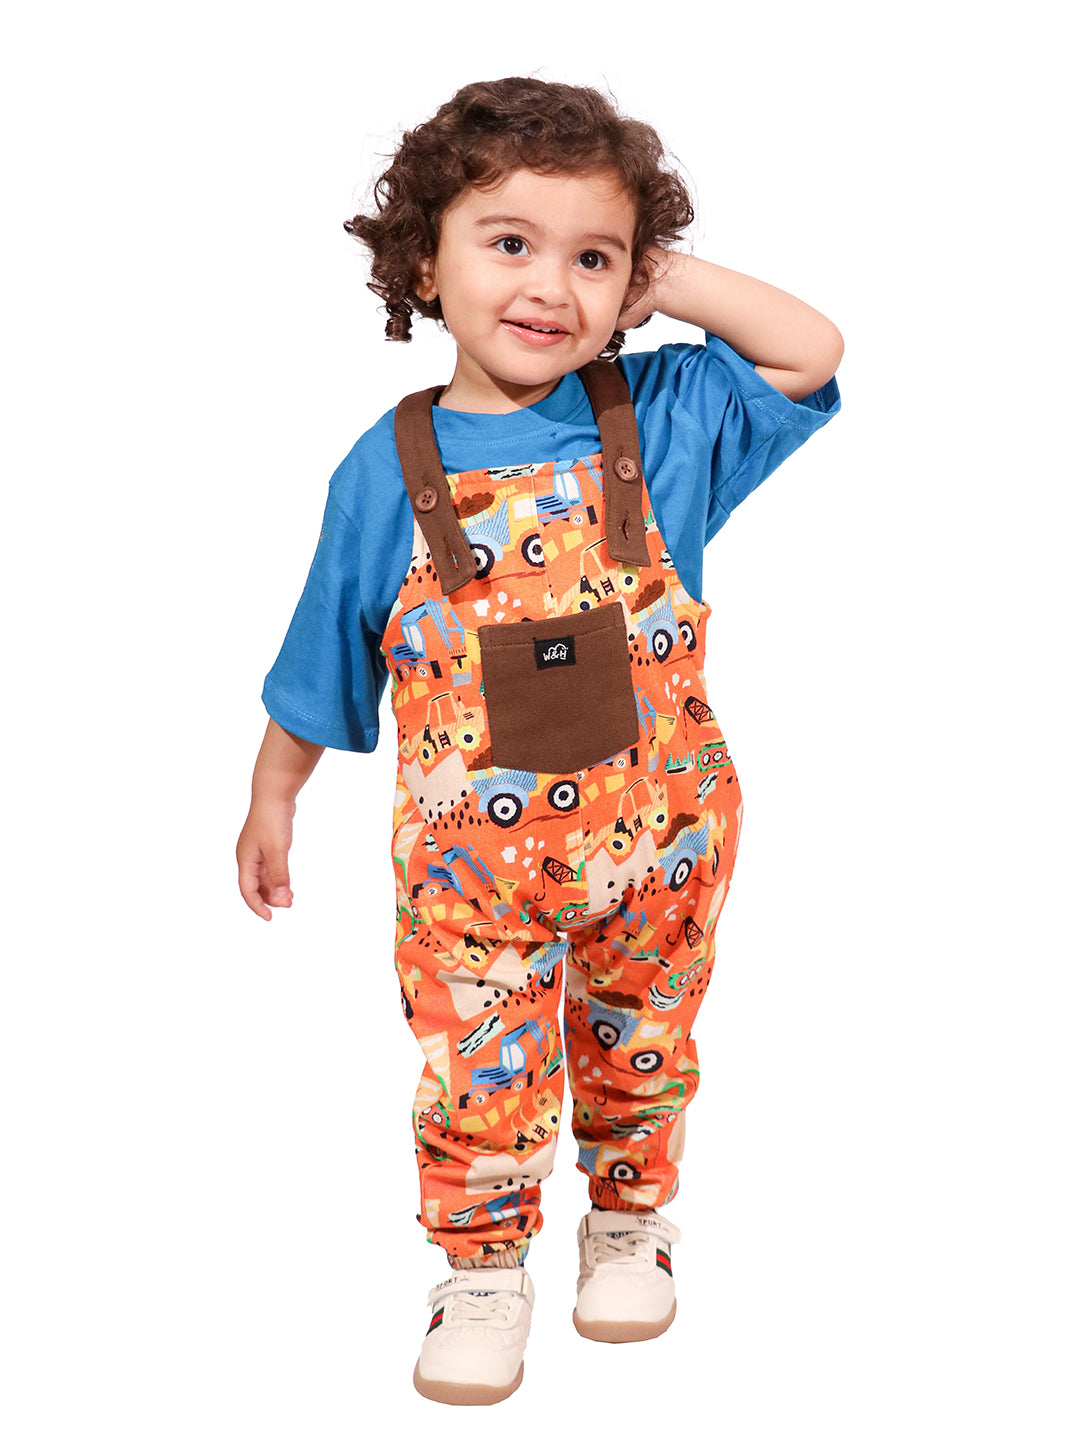 Construction Cotton Dungaree with Blue T-shirt for Boys & Girls